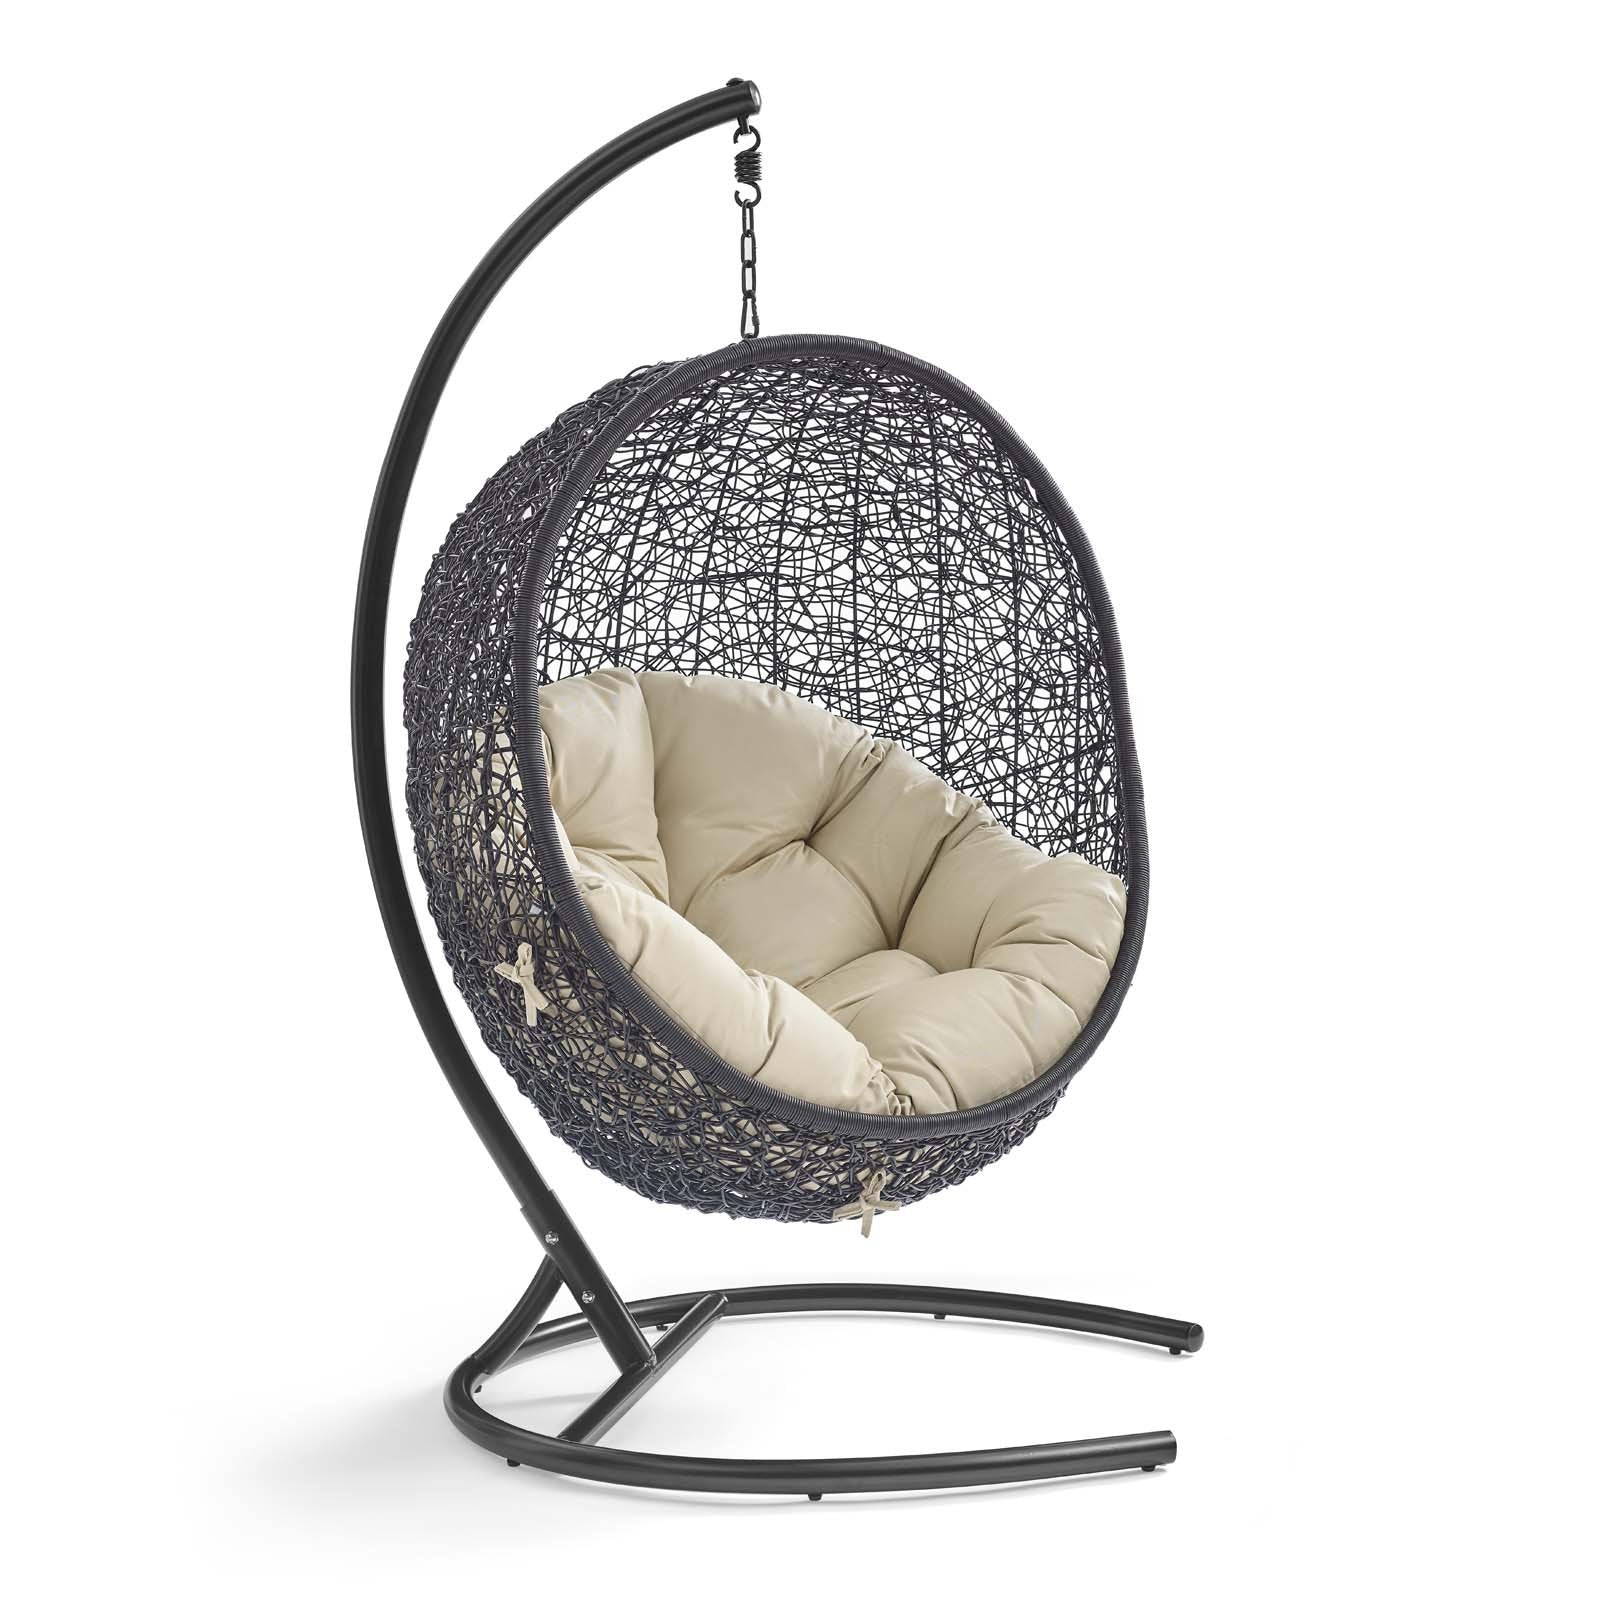 Hanging Basket Swing Chair For Indoor and Outdoor Decor - Encase Swing Outdoor Patio Lounge Chair